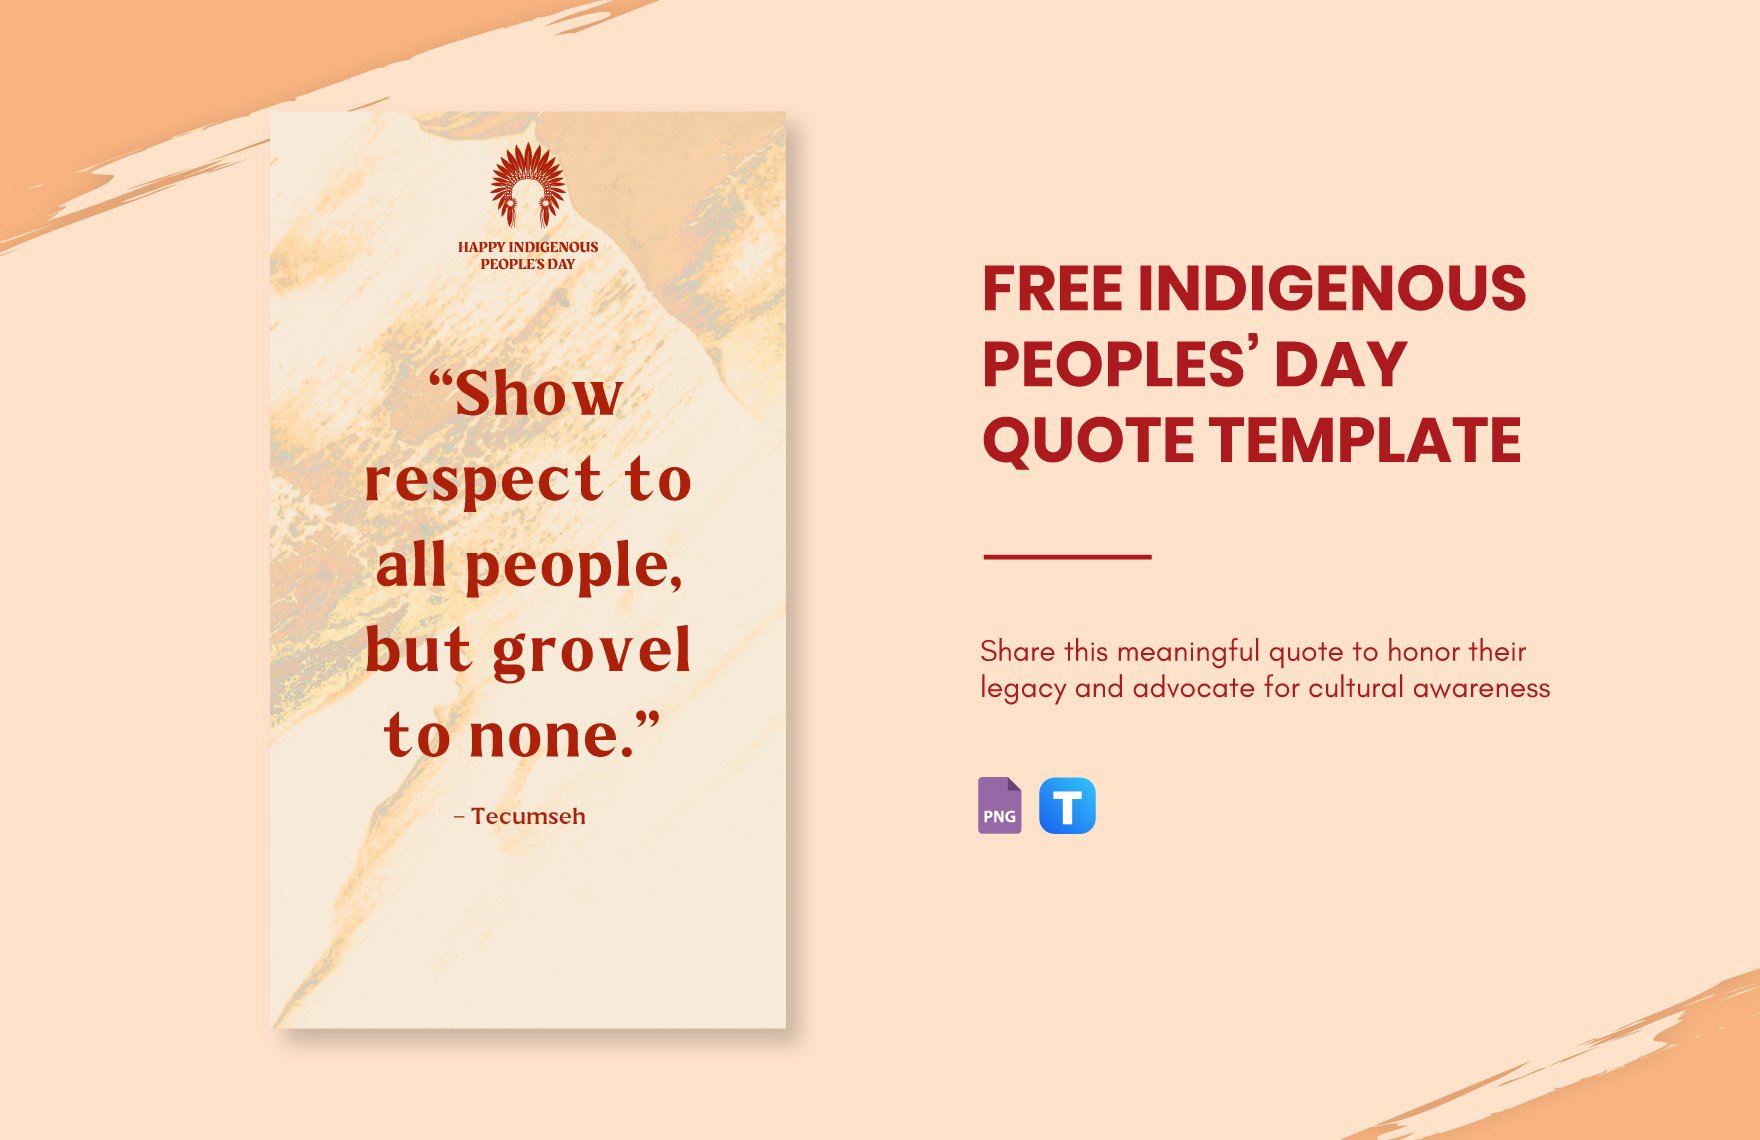 Free Indigenous Peoples' Day Quote in PNG